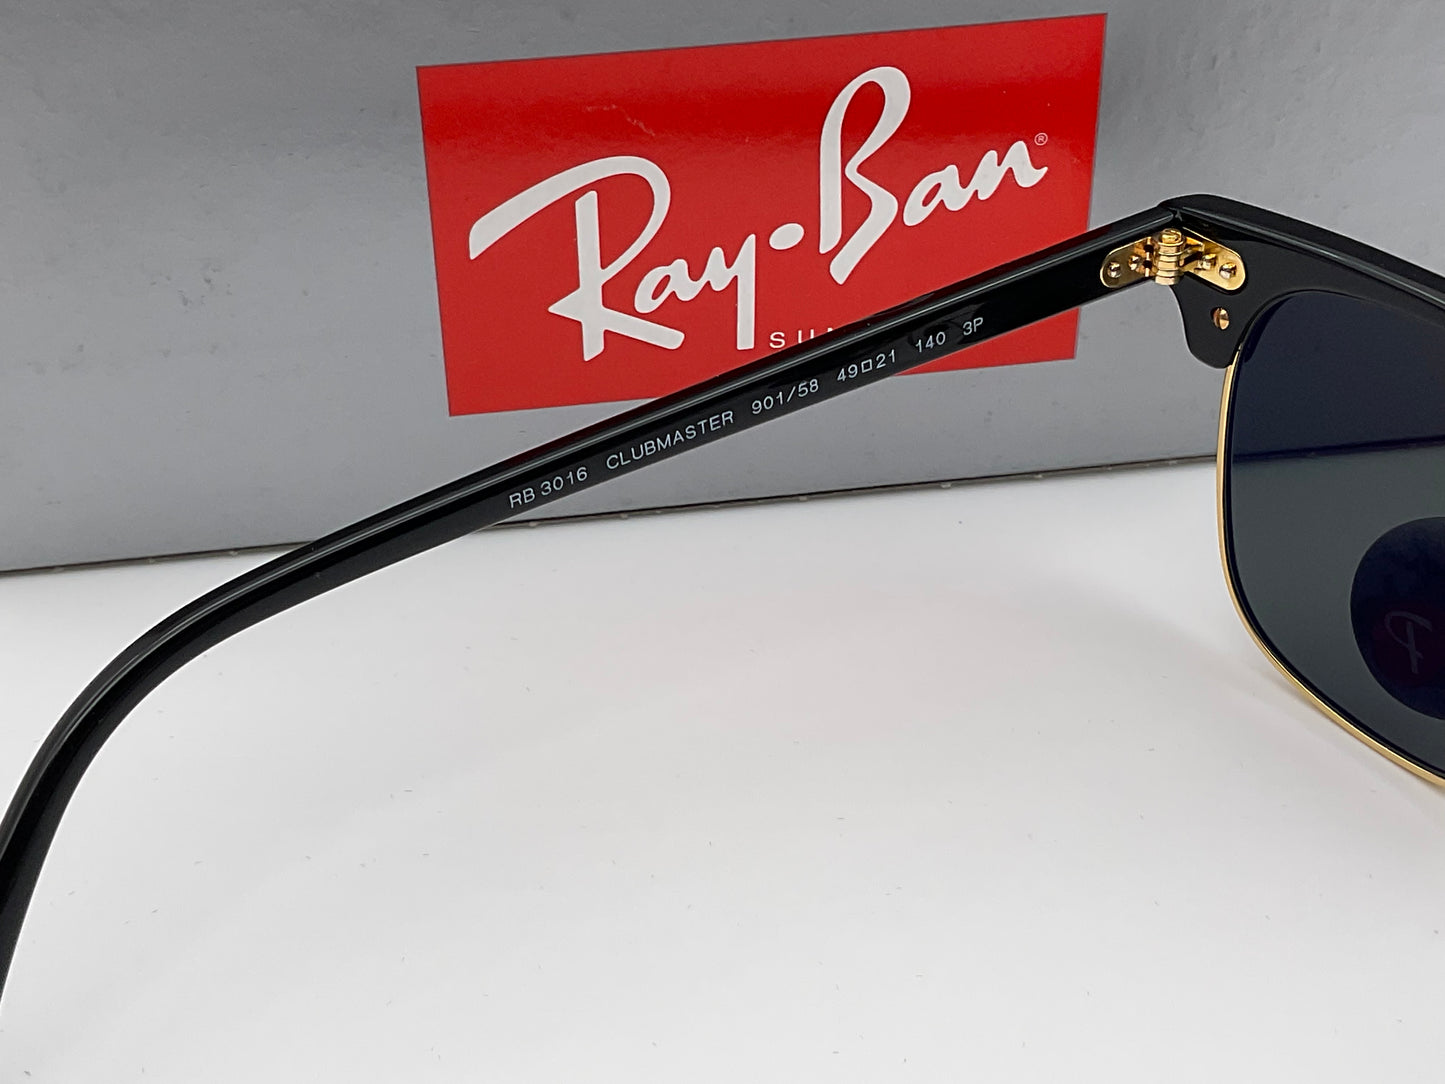 Ray-Ban Clubmaster 49mm Black G-15 Green Polarized Sunglasses RB3016 901/58 MSRP $213